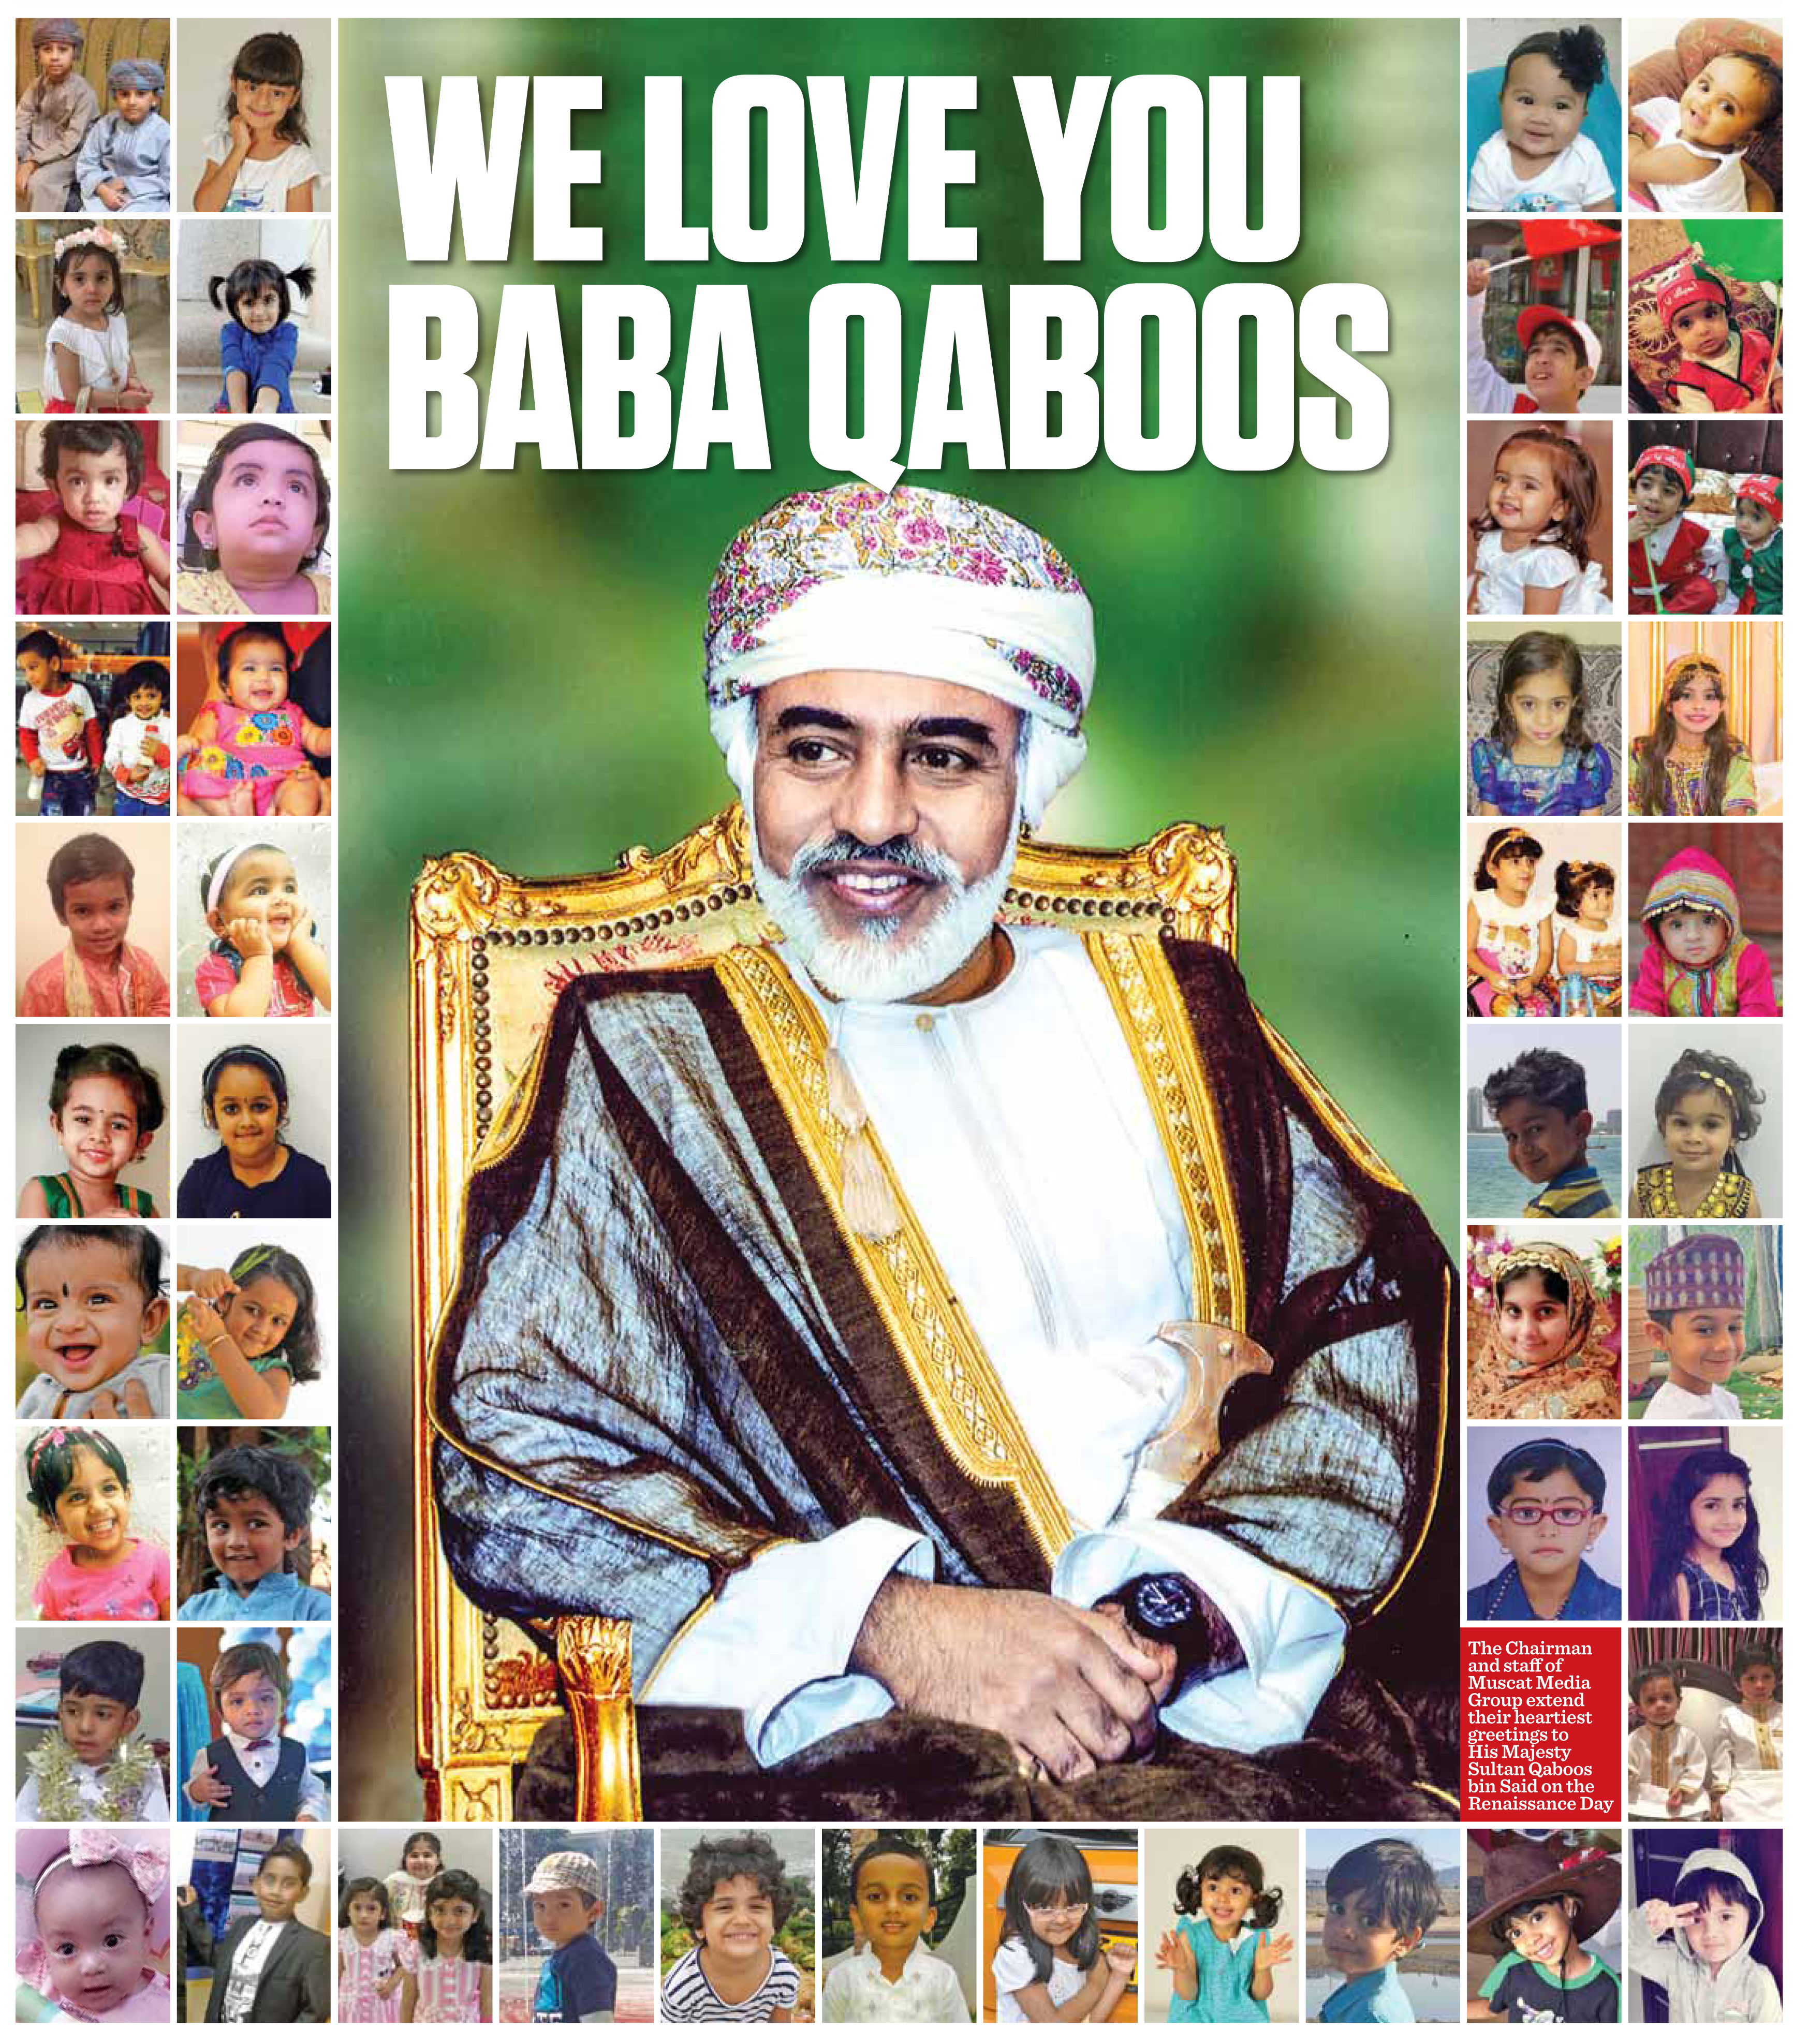 Renaissance Day: We love you Baba Qaboos, say children in Oman